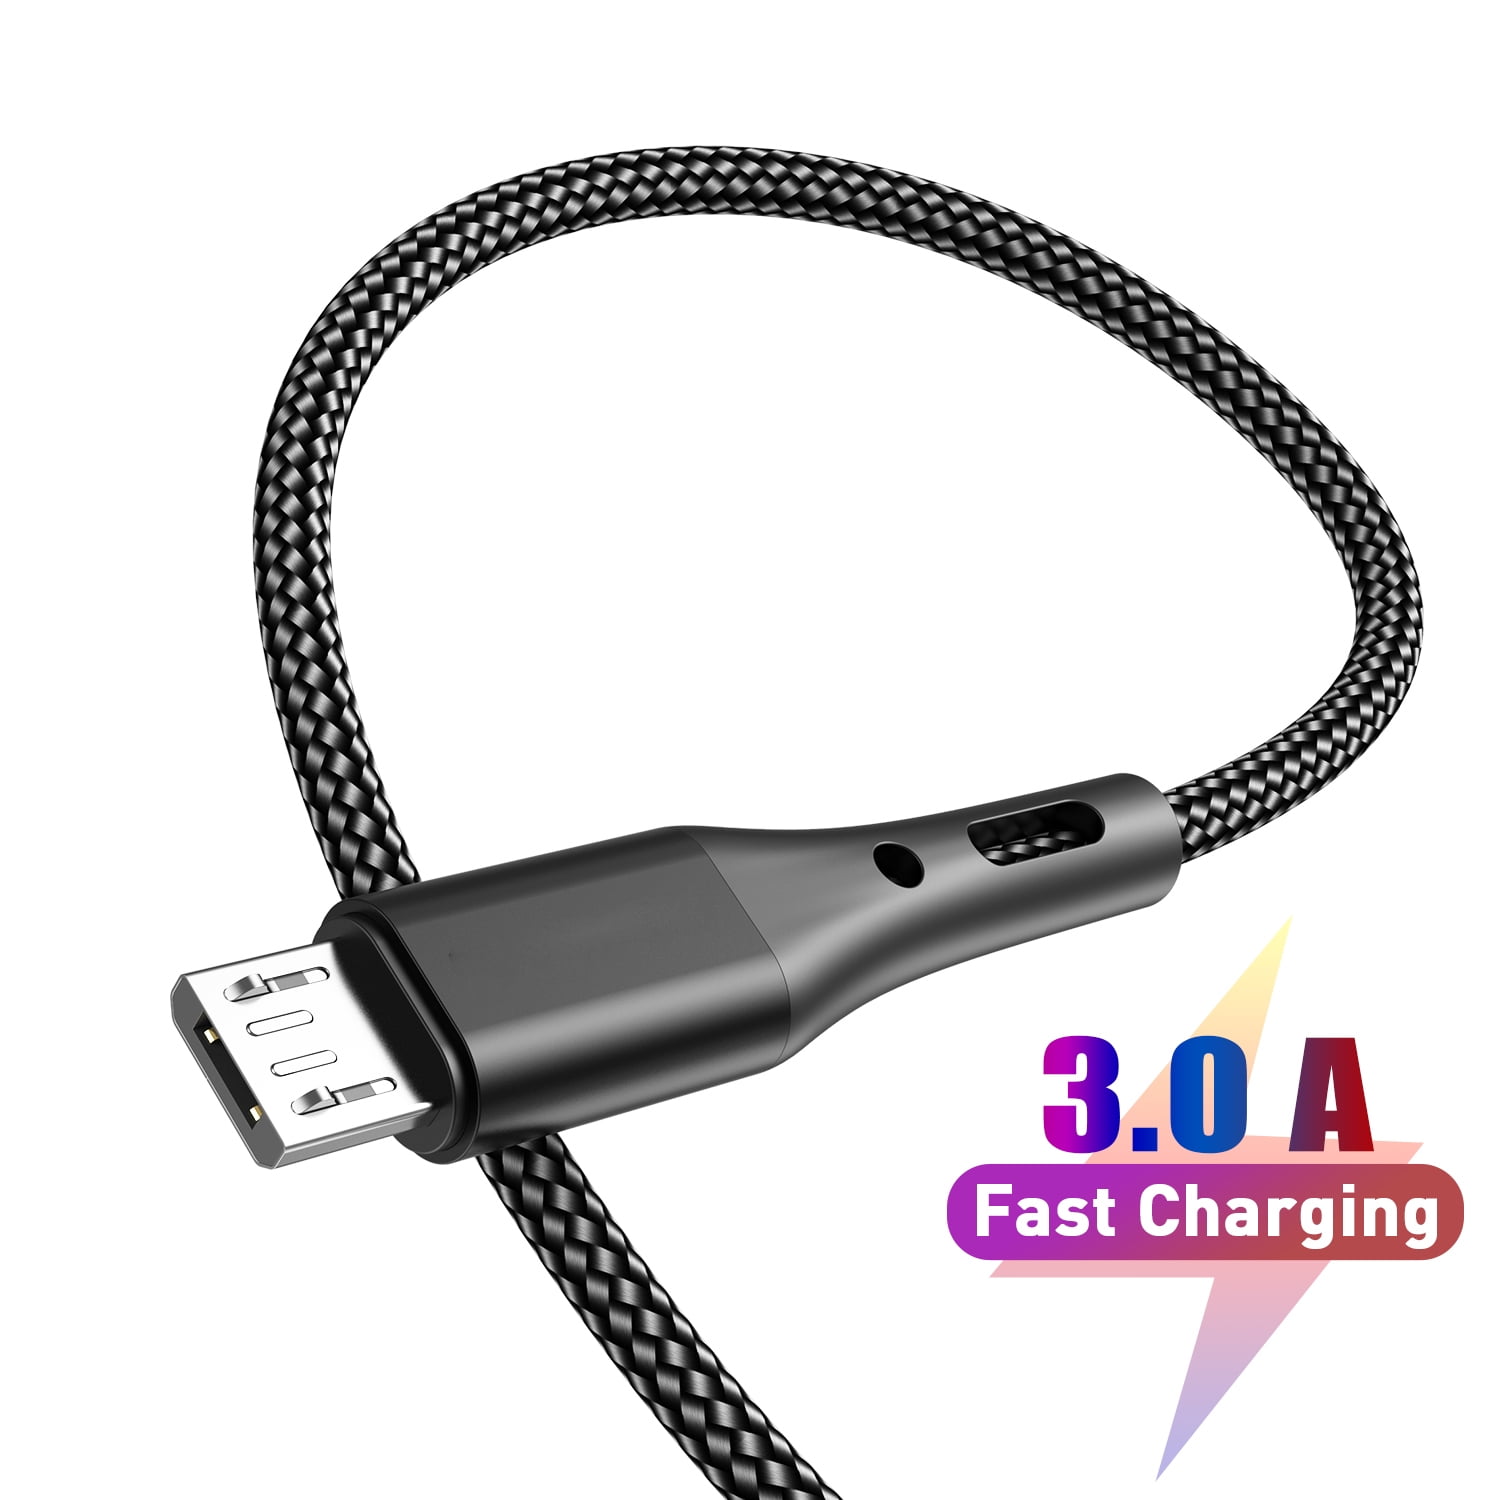 Fast Quick Charging MicroUSB Cable works with Samsung Samsung Galaxy Tab 3 7-inch is 5ft/1.5M allows fast charging Speeds!